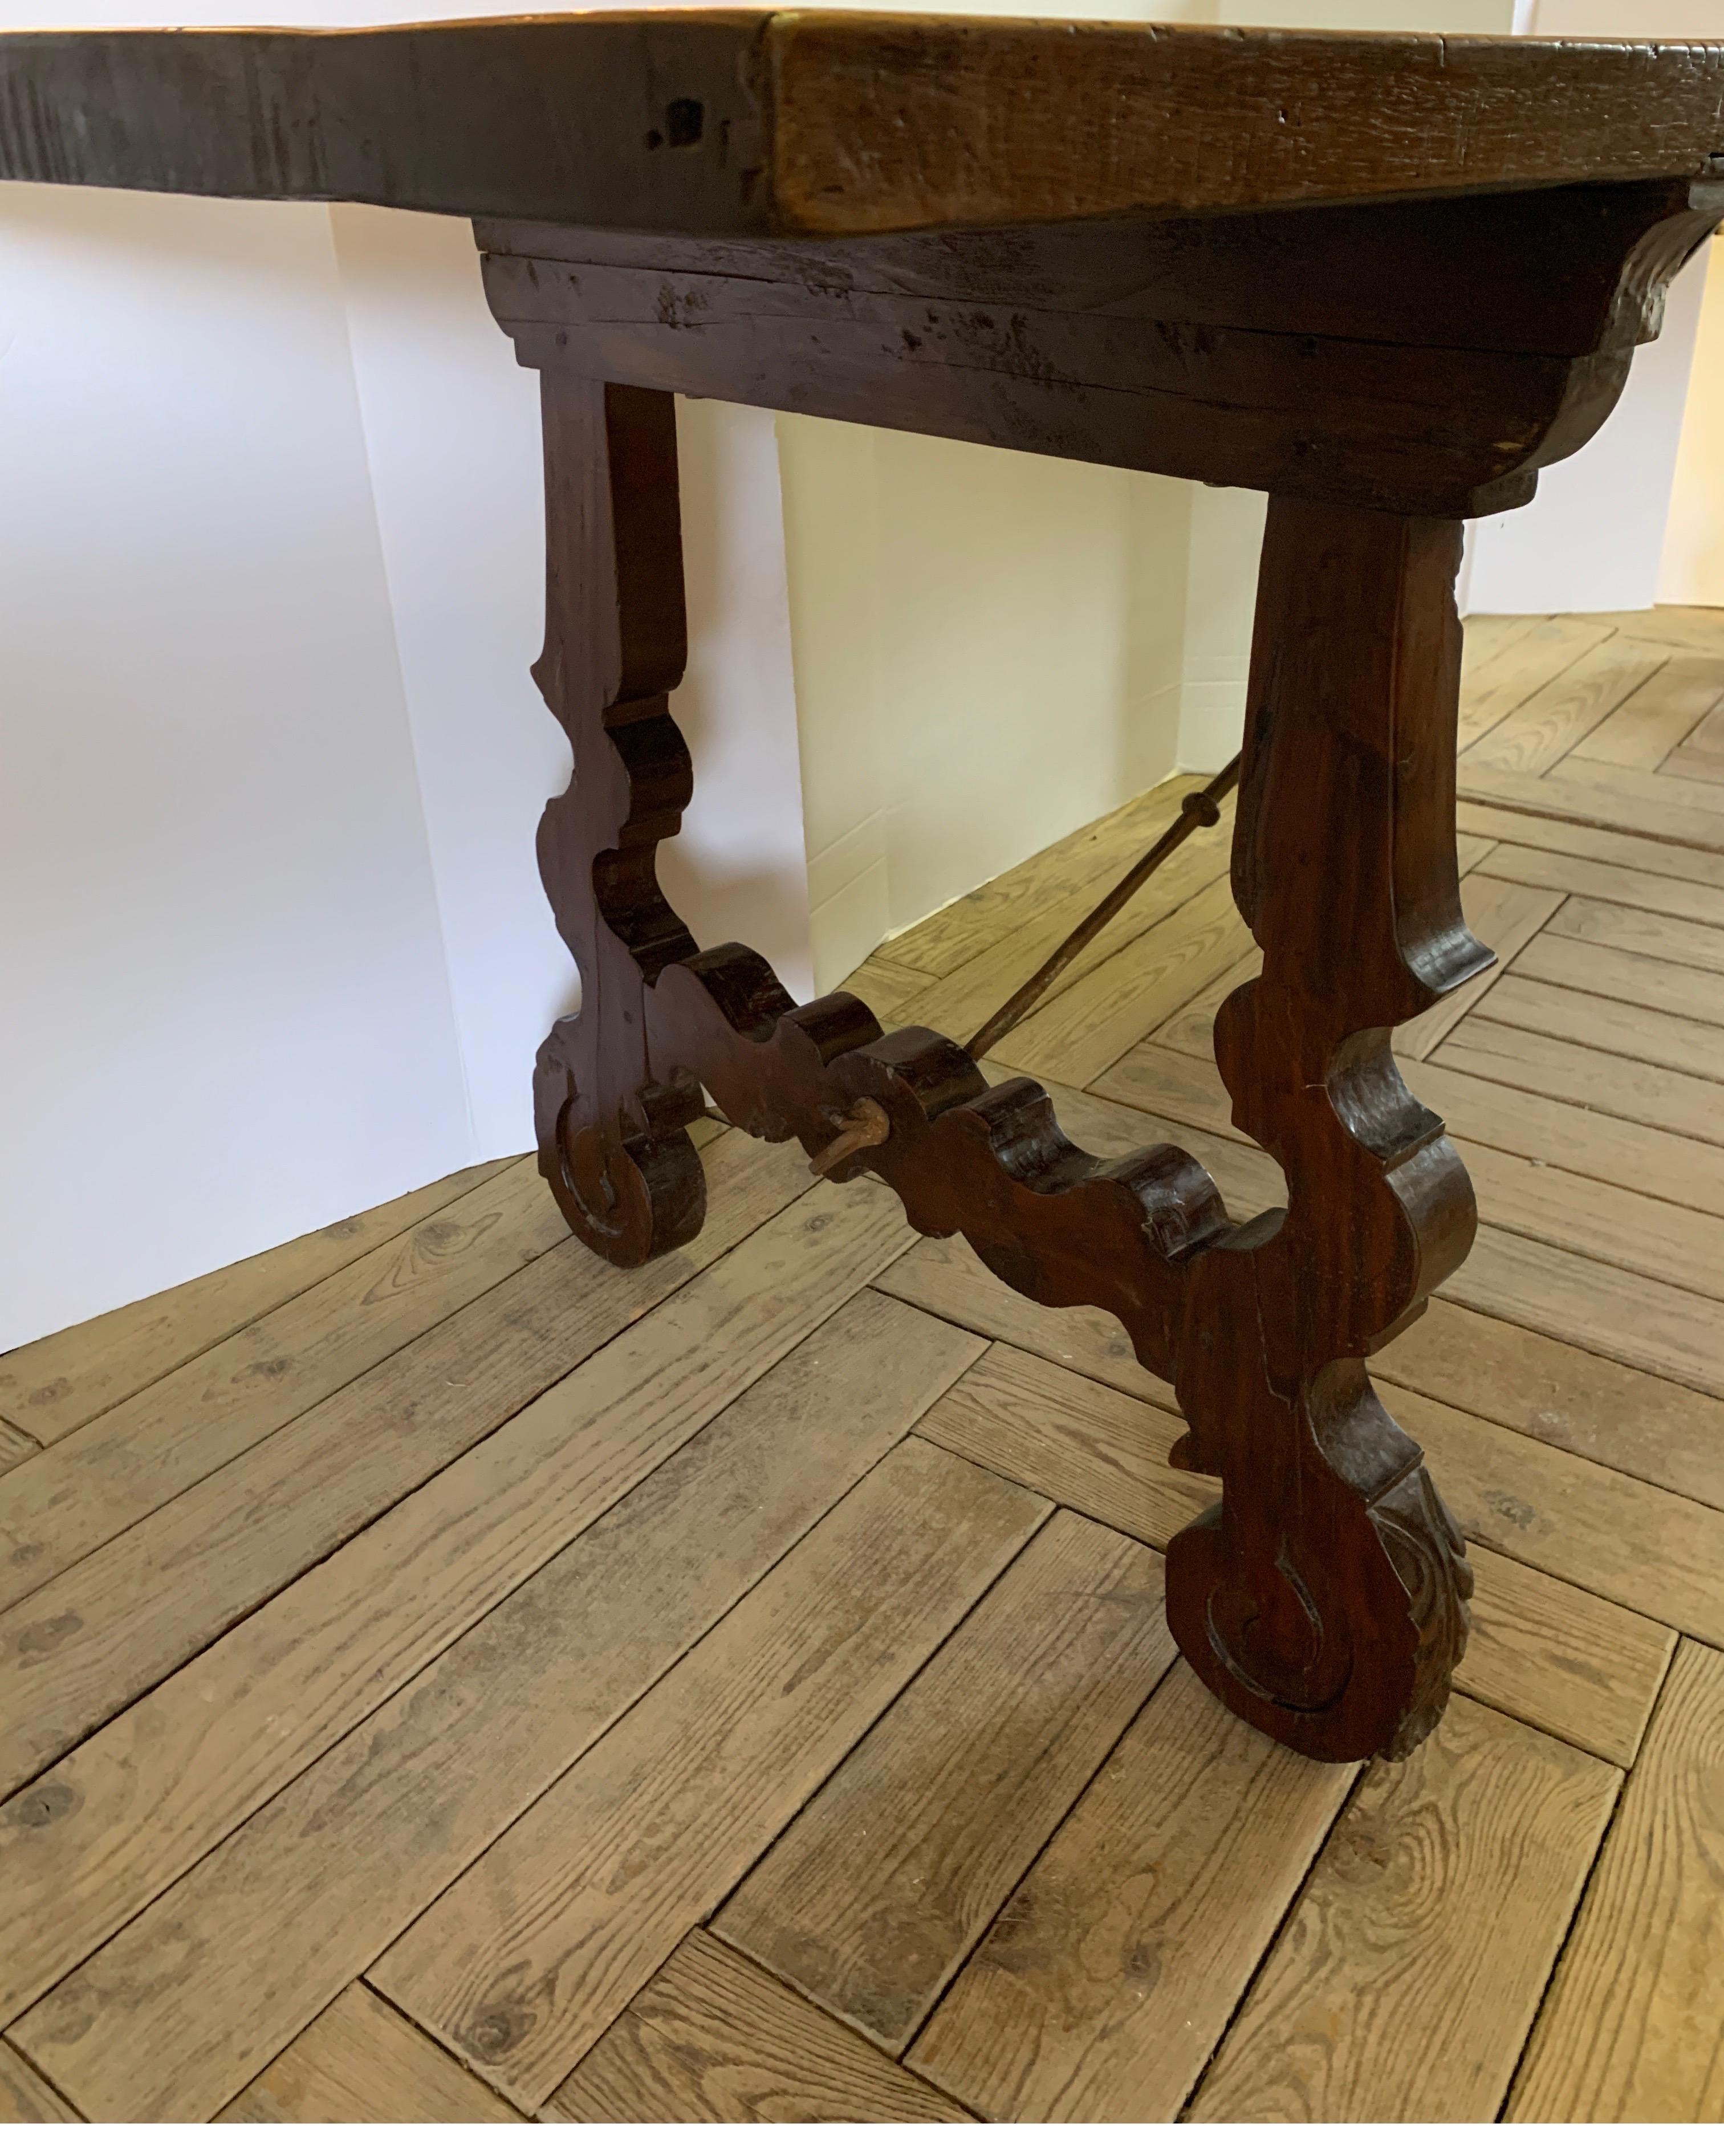 19th Century Walnut Dining Table With Iron Stretcher From Spain That Seats 10  9